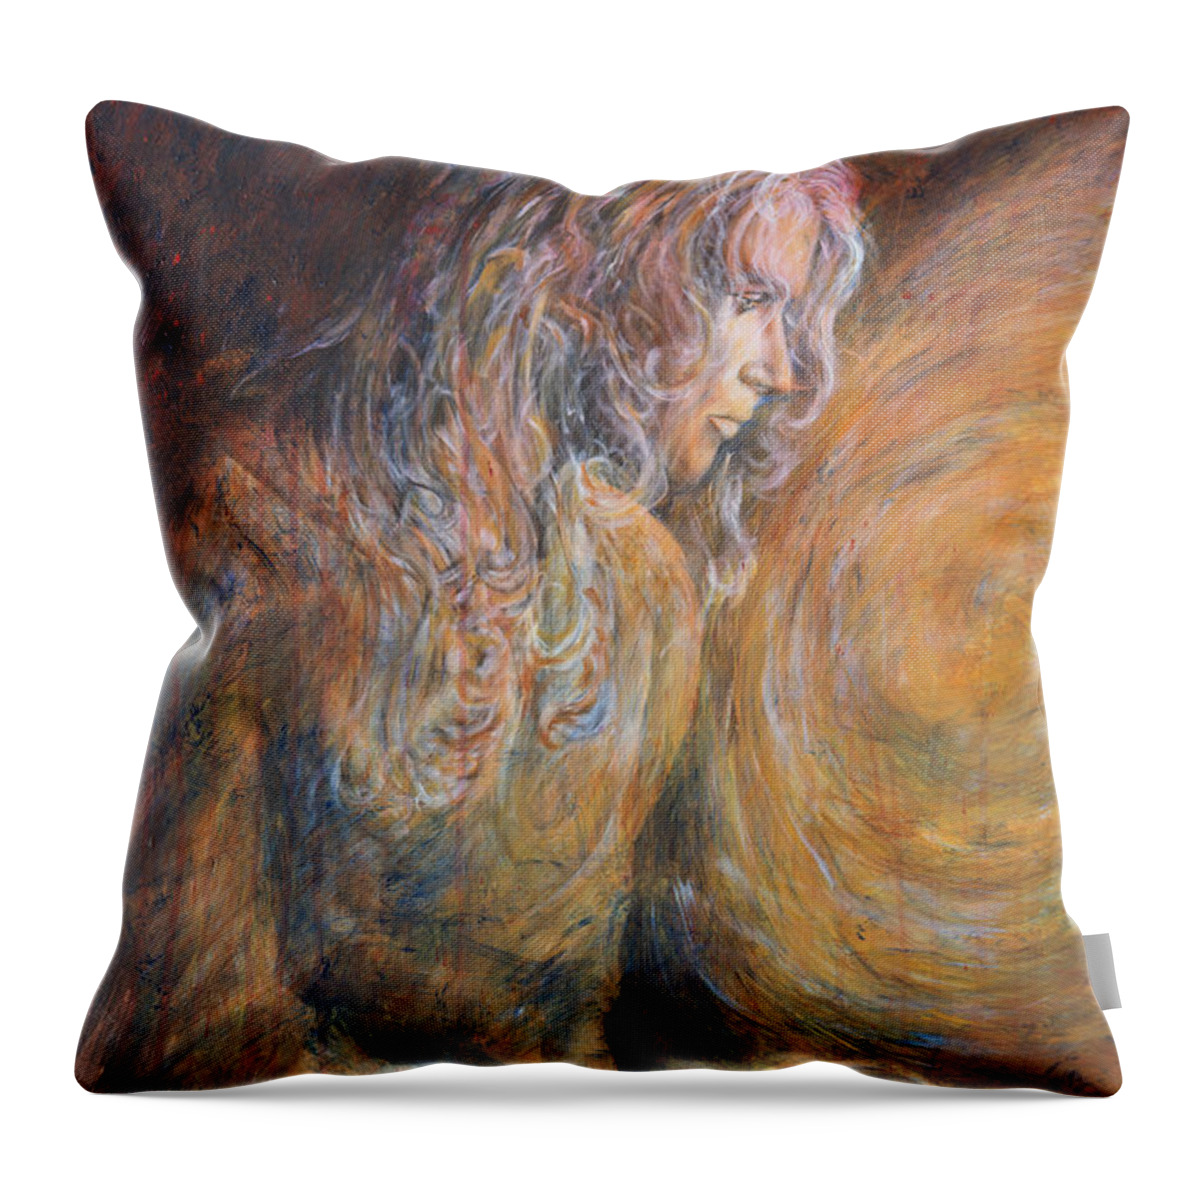 Jesus Throw Pillow featuring the painting Hiding Place by Nik Helbig